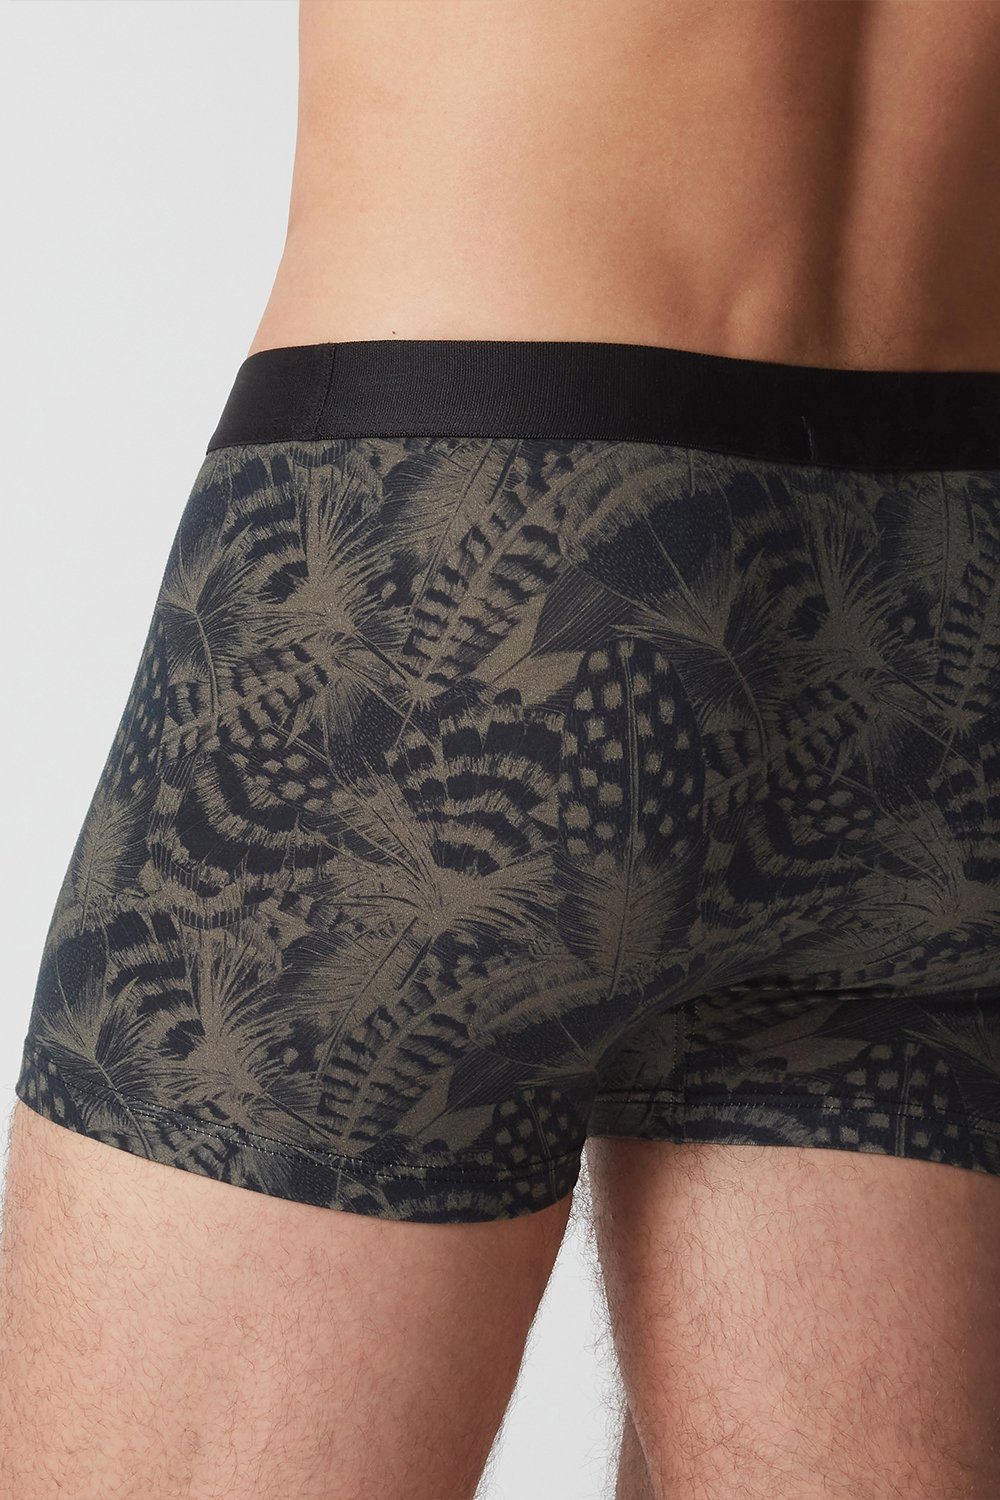 XB78T Plumes Boxer Hipster Aubade